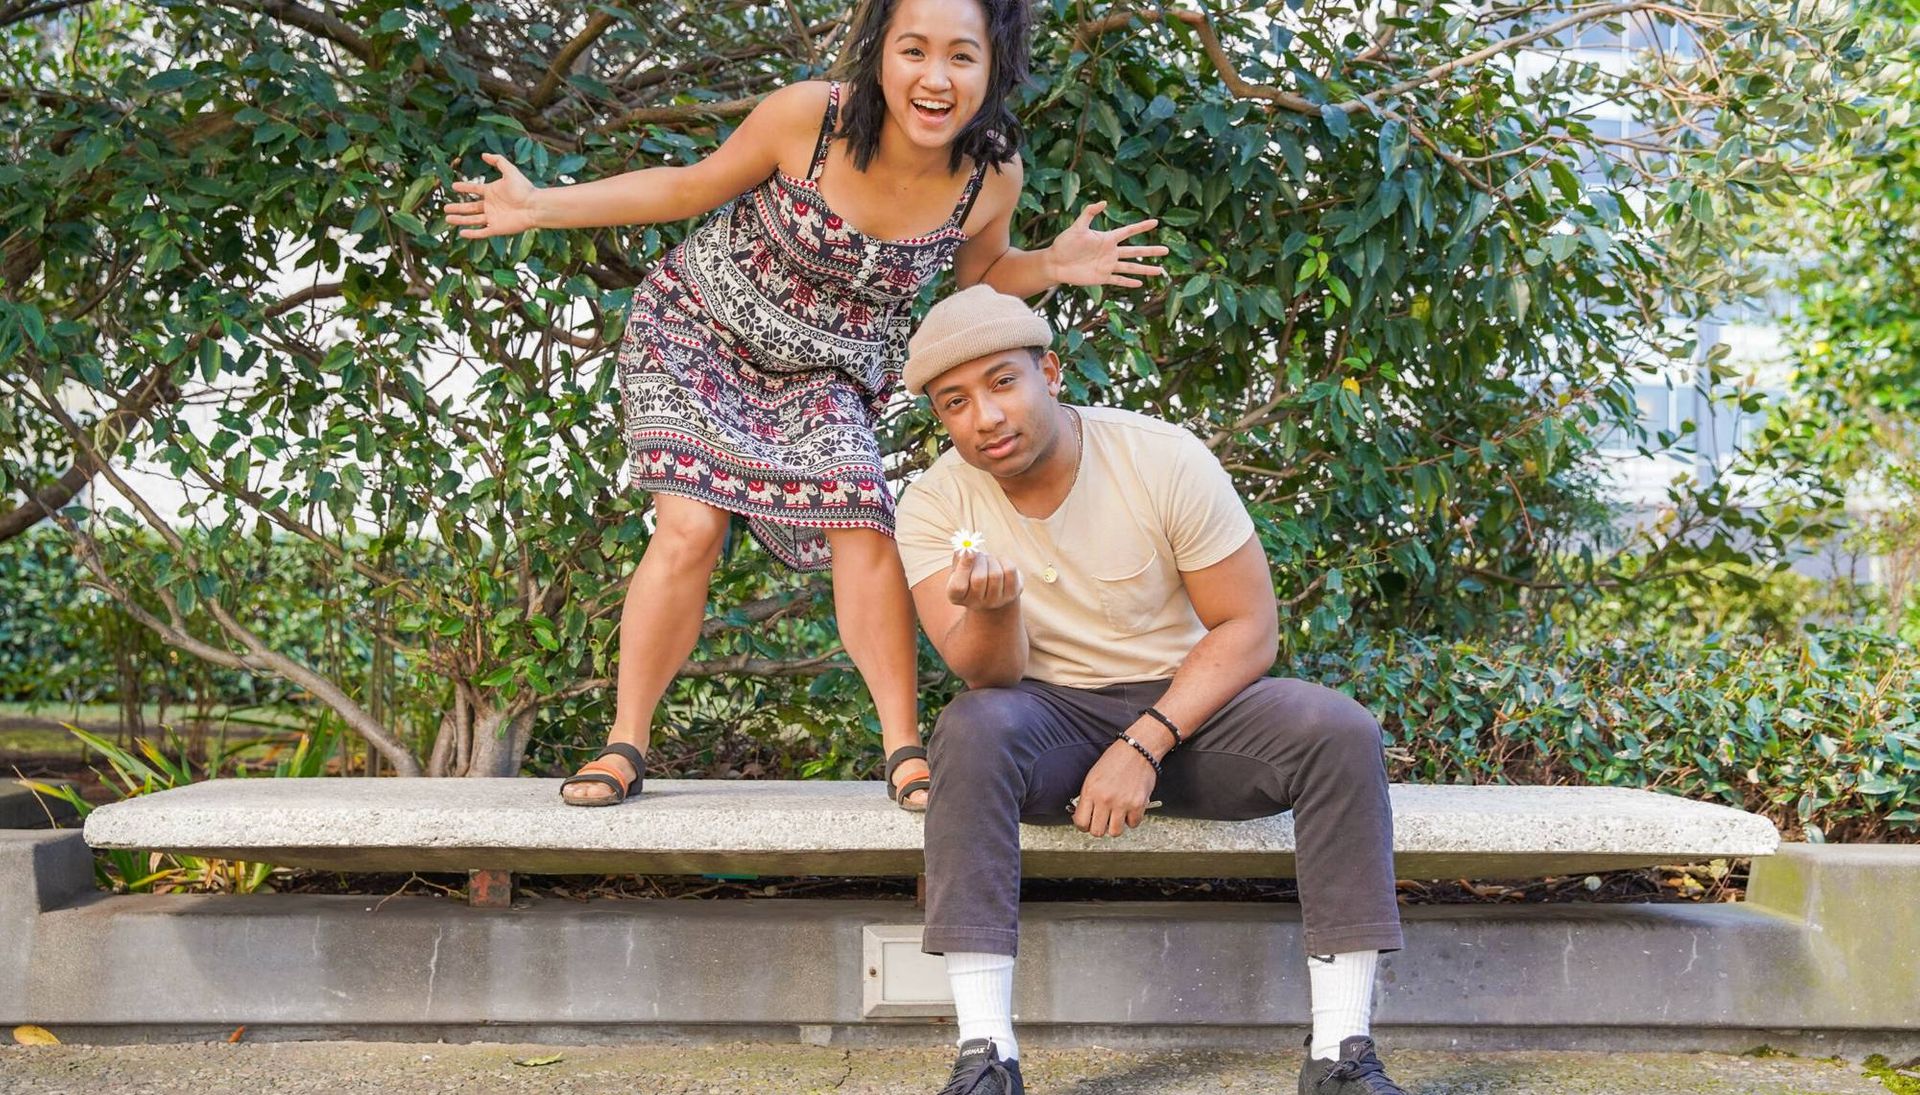 Photograph of two young people on a bench outdoors, one man sitting and holding a flower and one woman standing with her arms spread in front of a tree